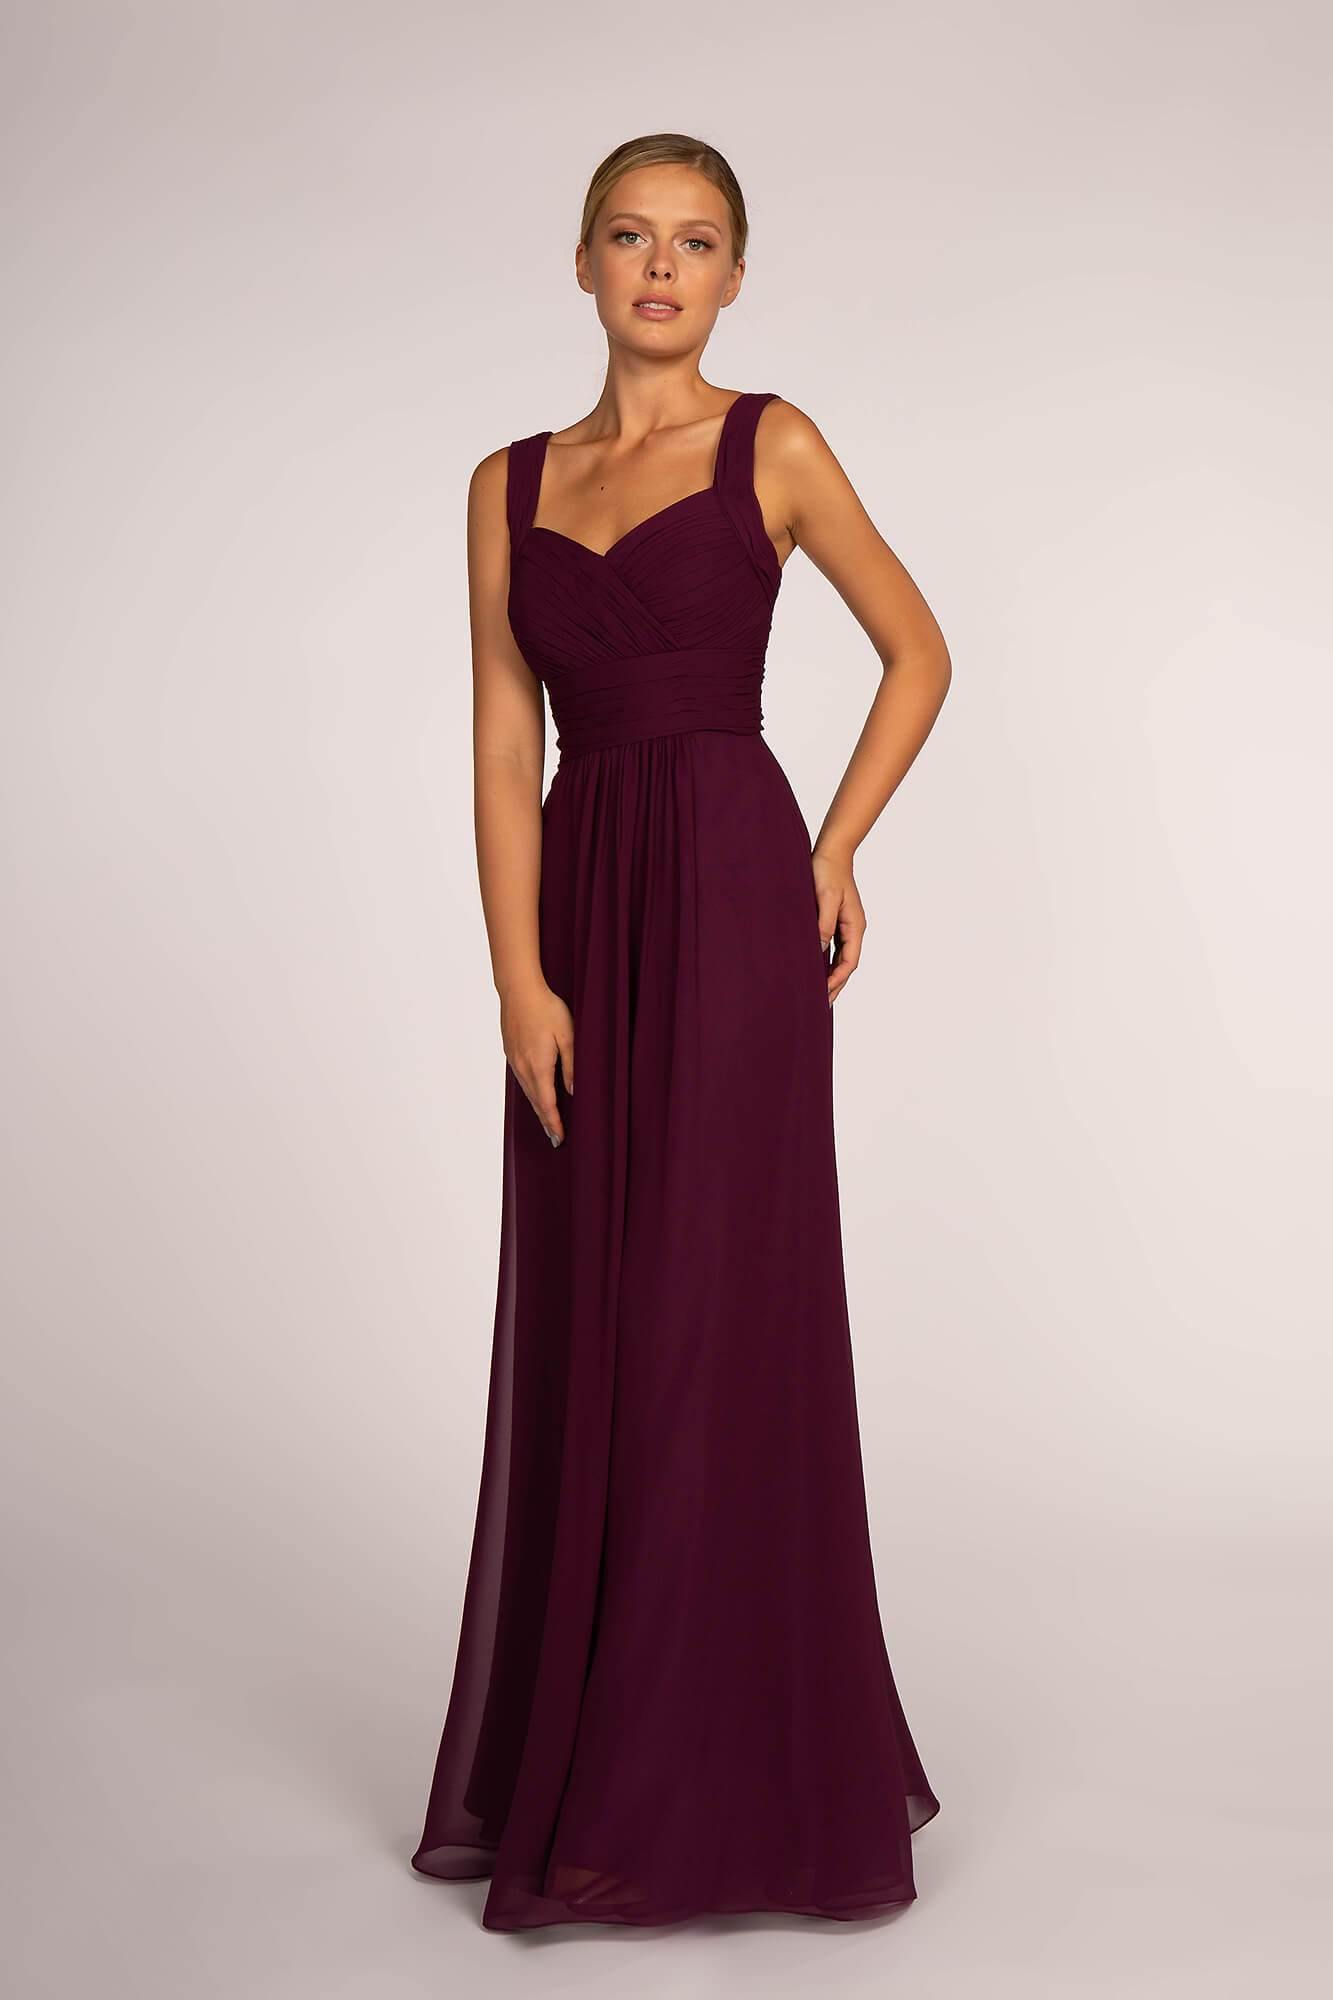 Navy Long Formal Sleeveless Dress Sale for $39.99 – The Dress Outlet